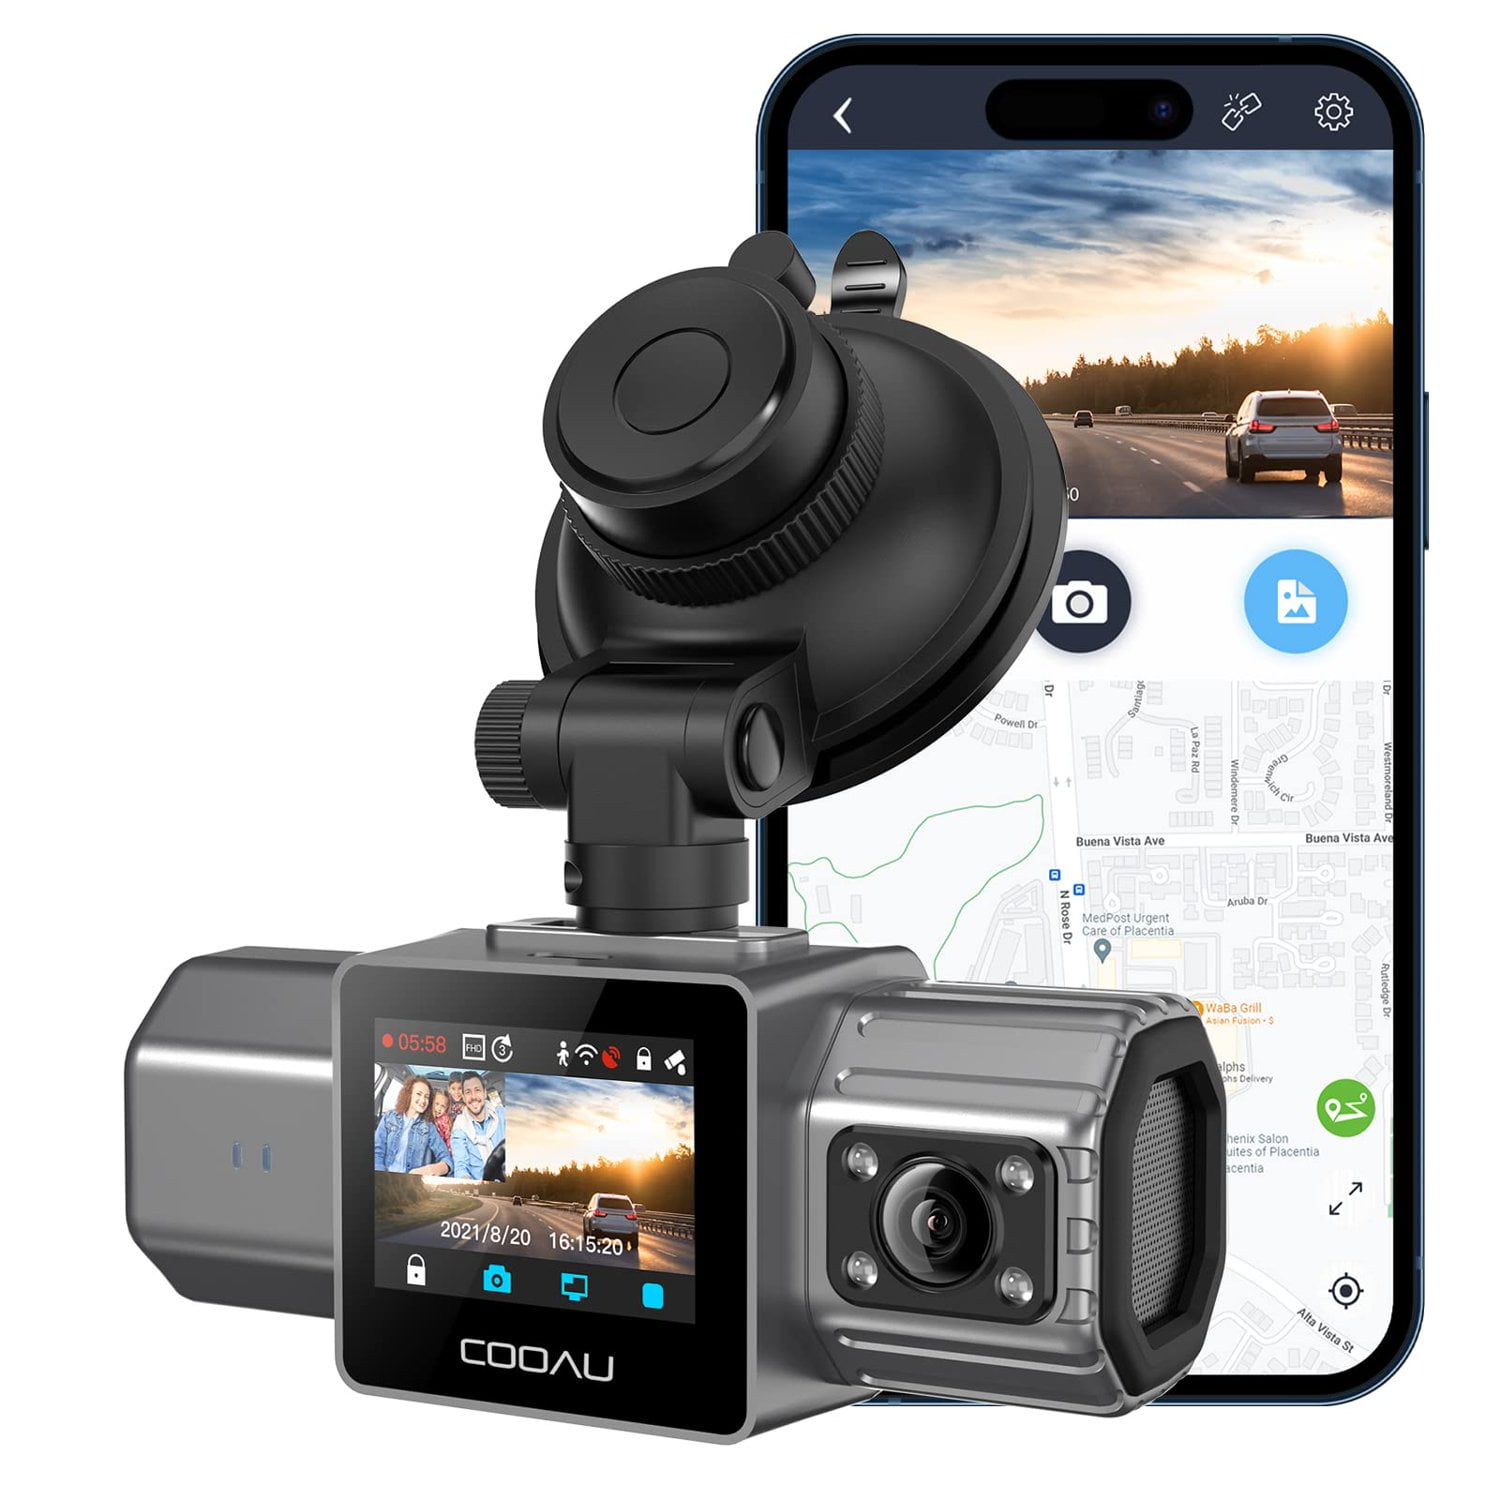 Rexing V2 Pro Ai Dash Cam, 3-Channel Front/Cabin/Rear 1080p Recording with Wi-Fi and GPS